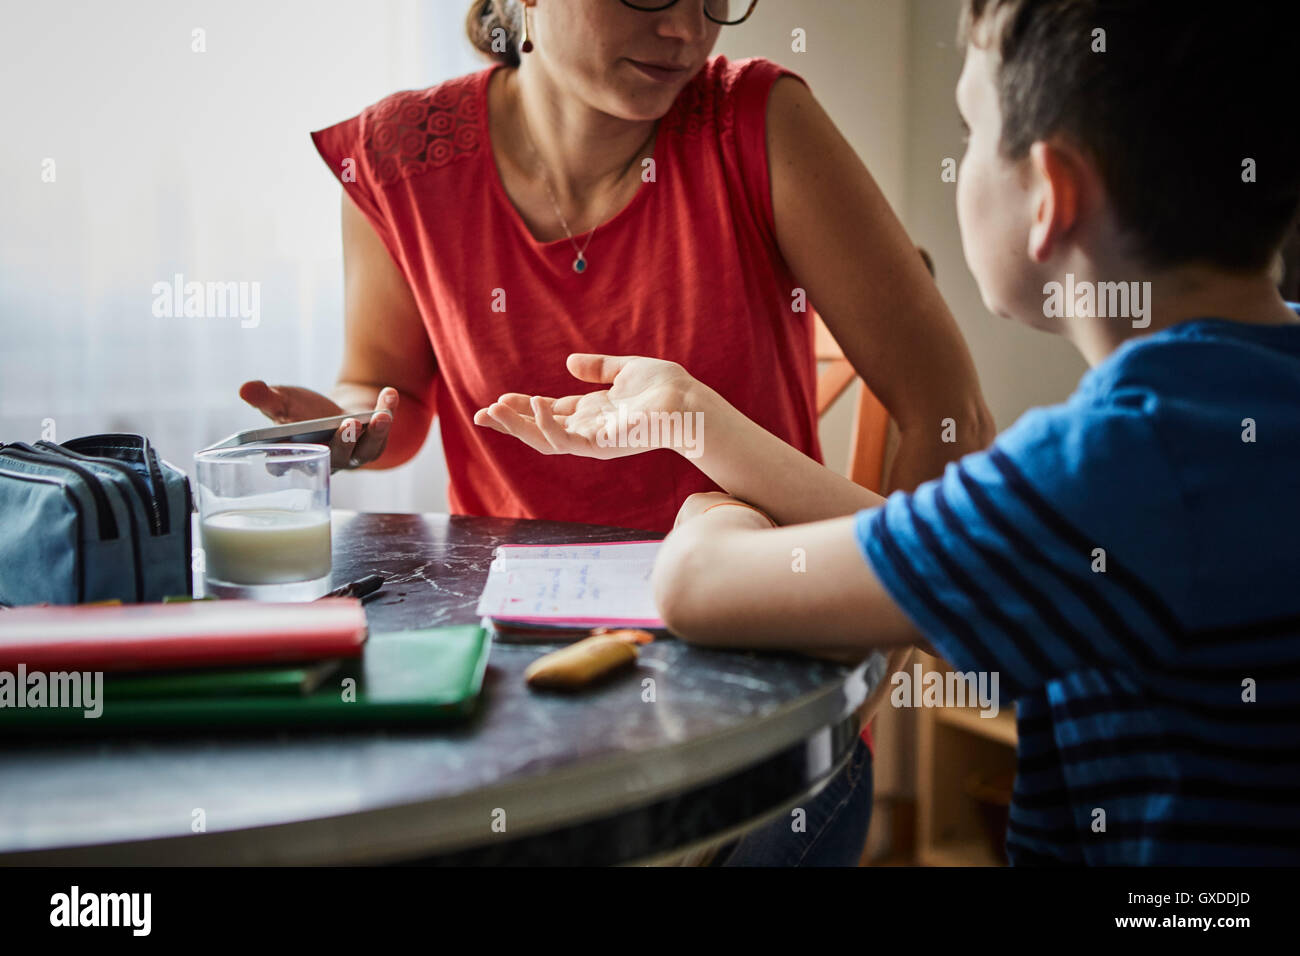 Mother and son at dining table having discussion Stock Photo